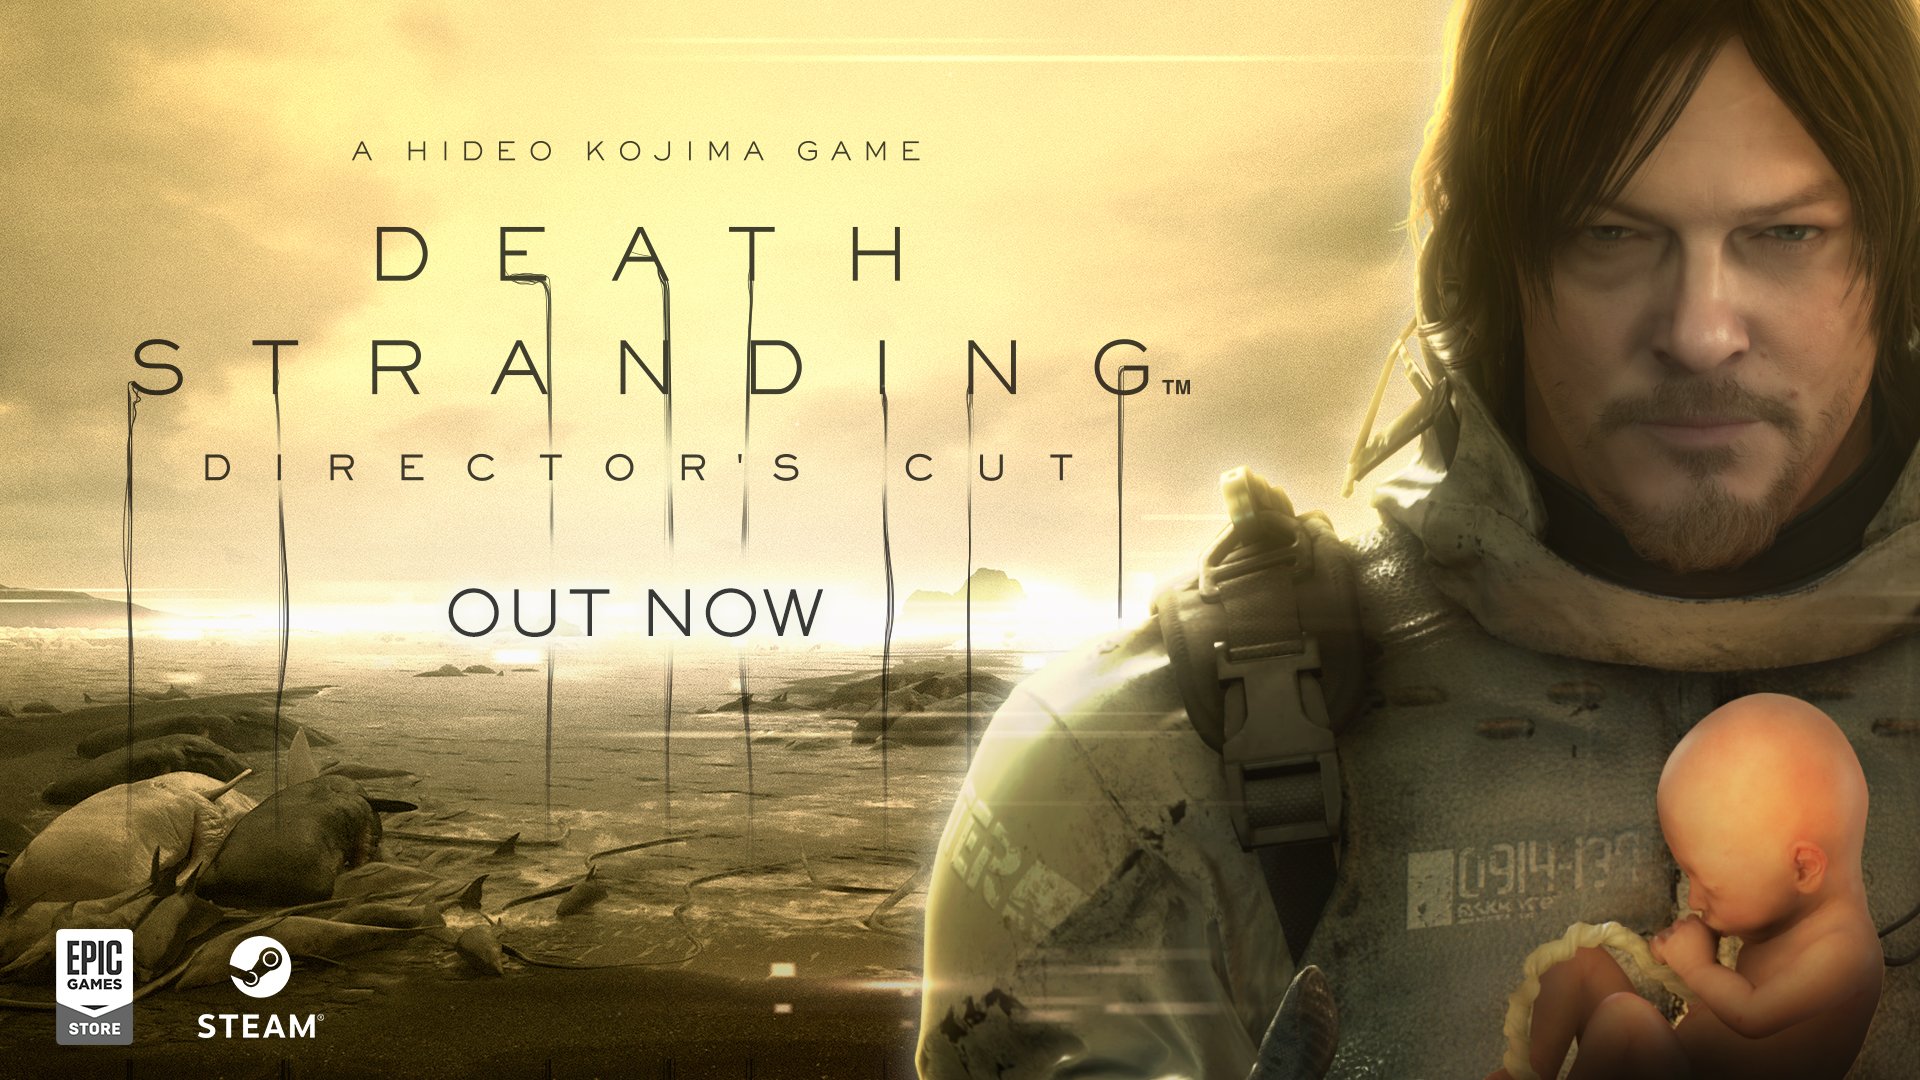 DEATH STRANDING DIRECTOR’S CUT IS OUT NOW